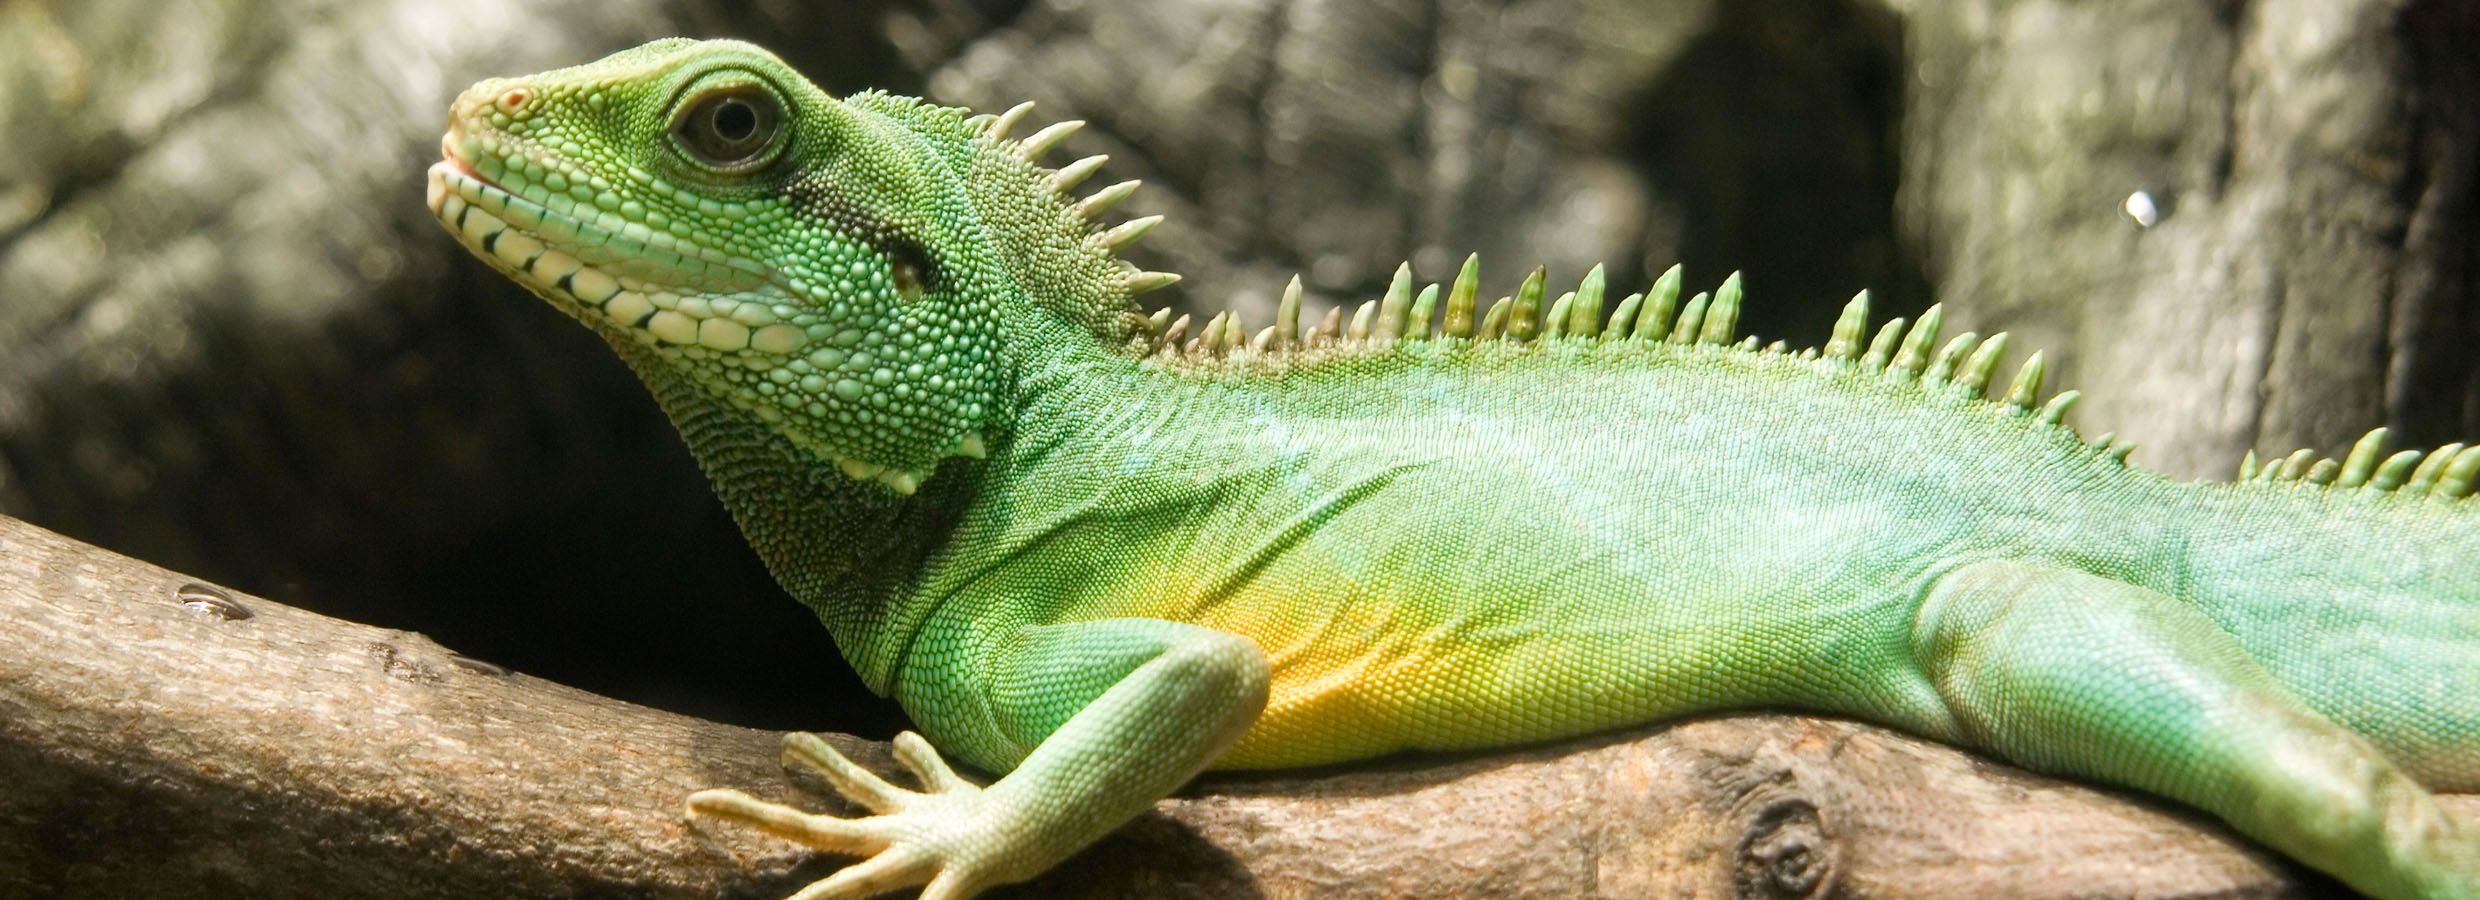 awesome water dragons